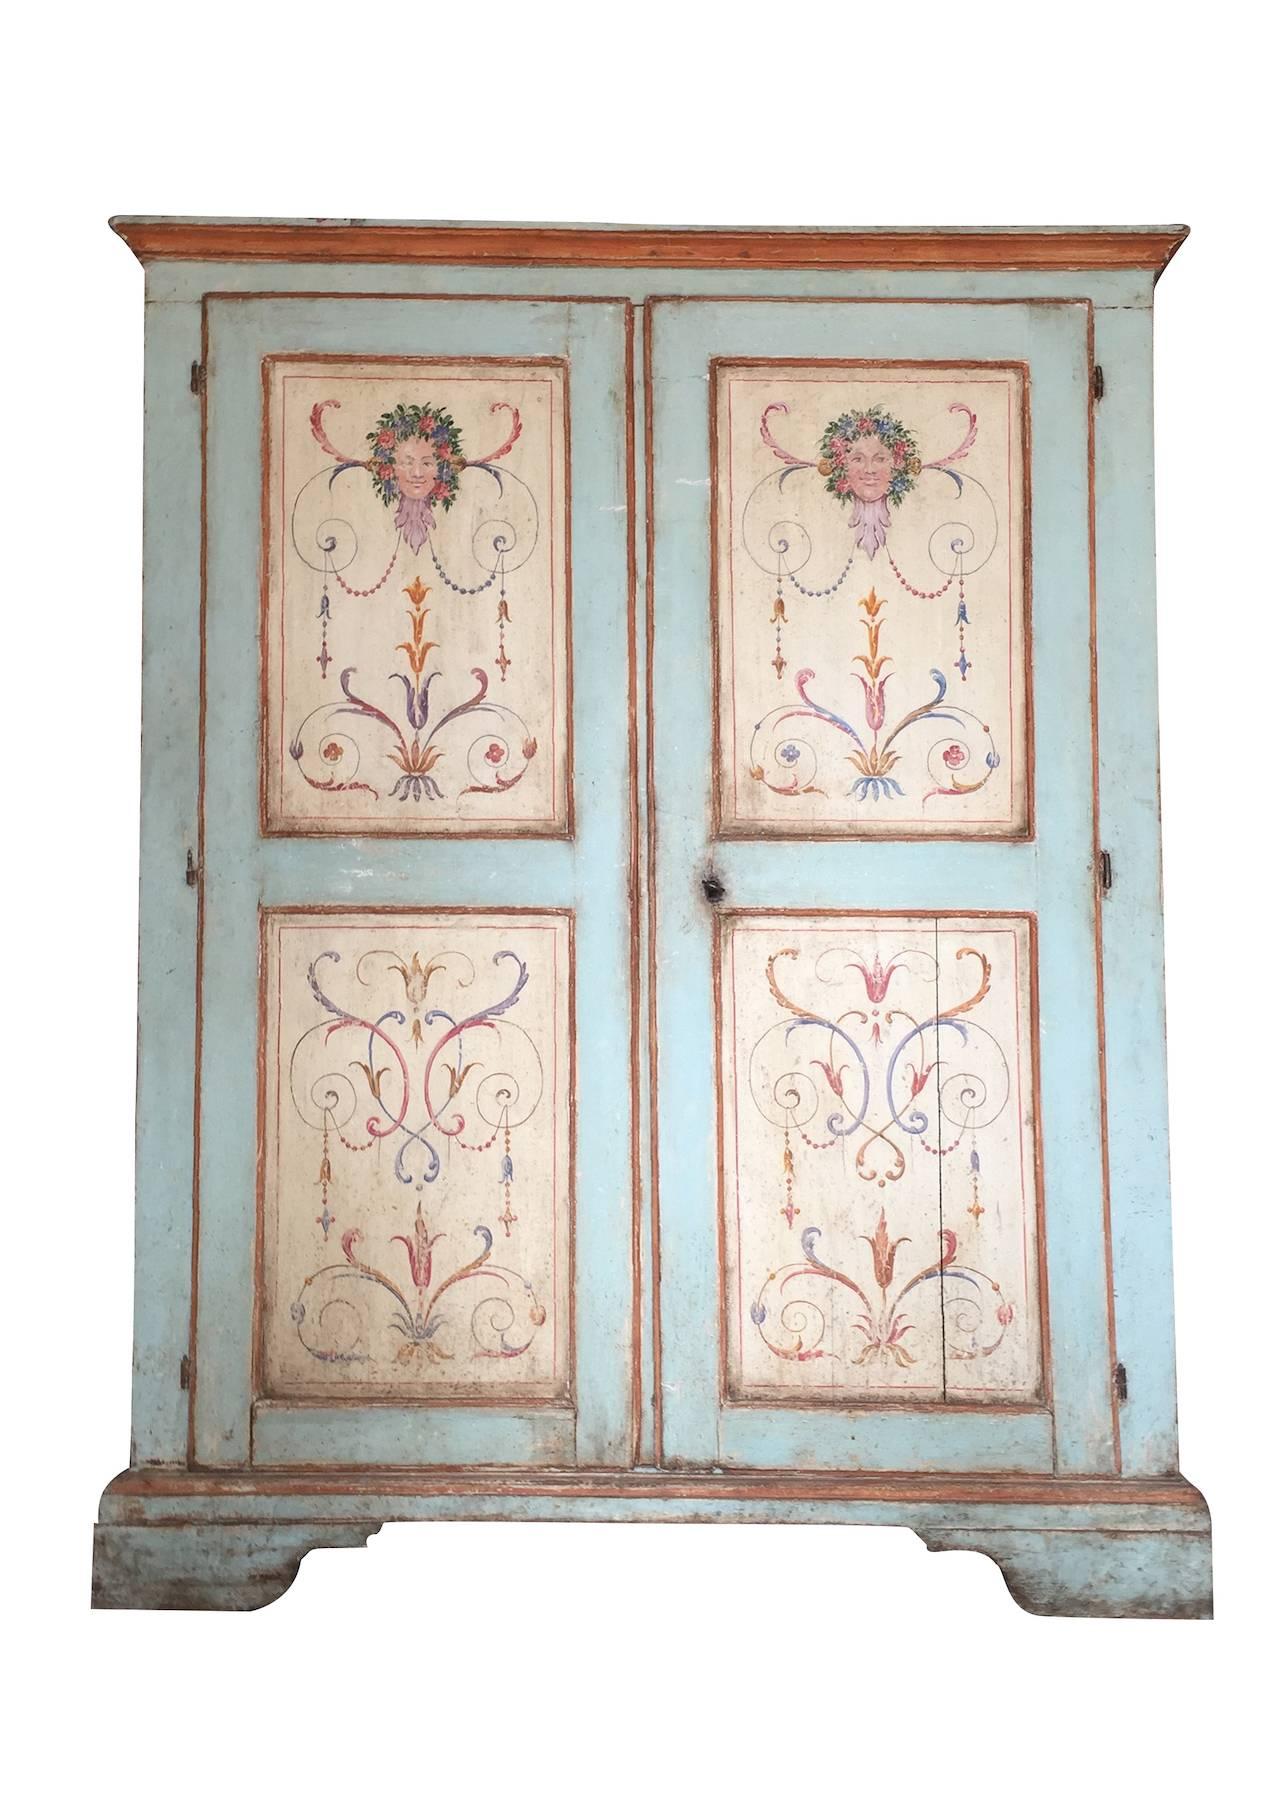 Beautiful painted 18th century Italian wardrobe, superior panels door decorated with typical 